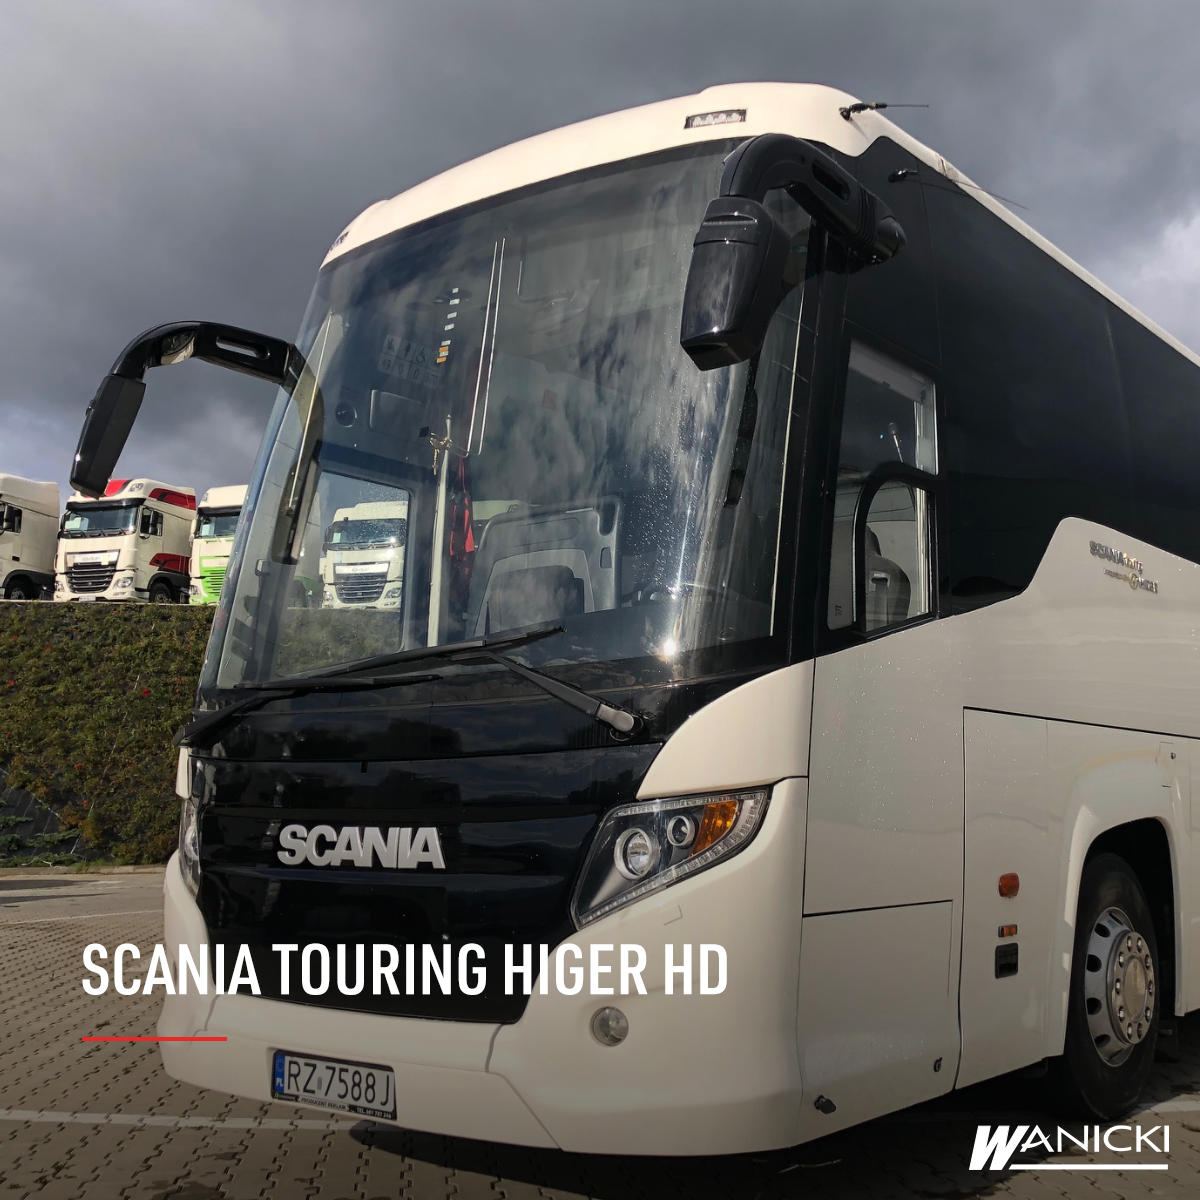 SCANIA TOURING HIGER HD 2012 r. *** PROMOCJA ***